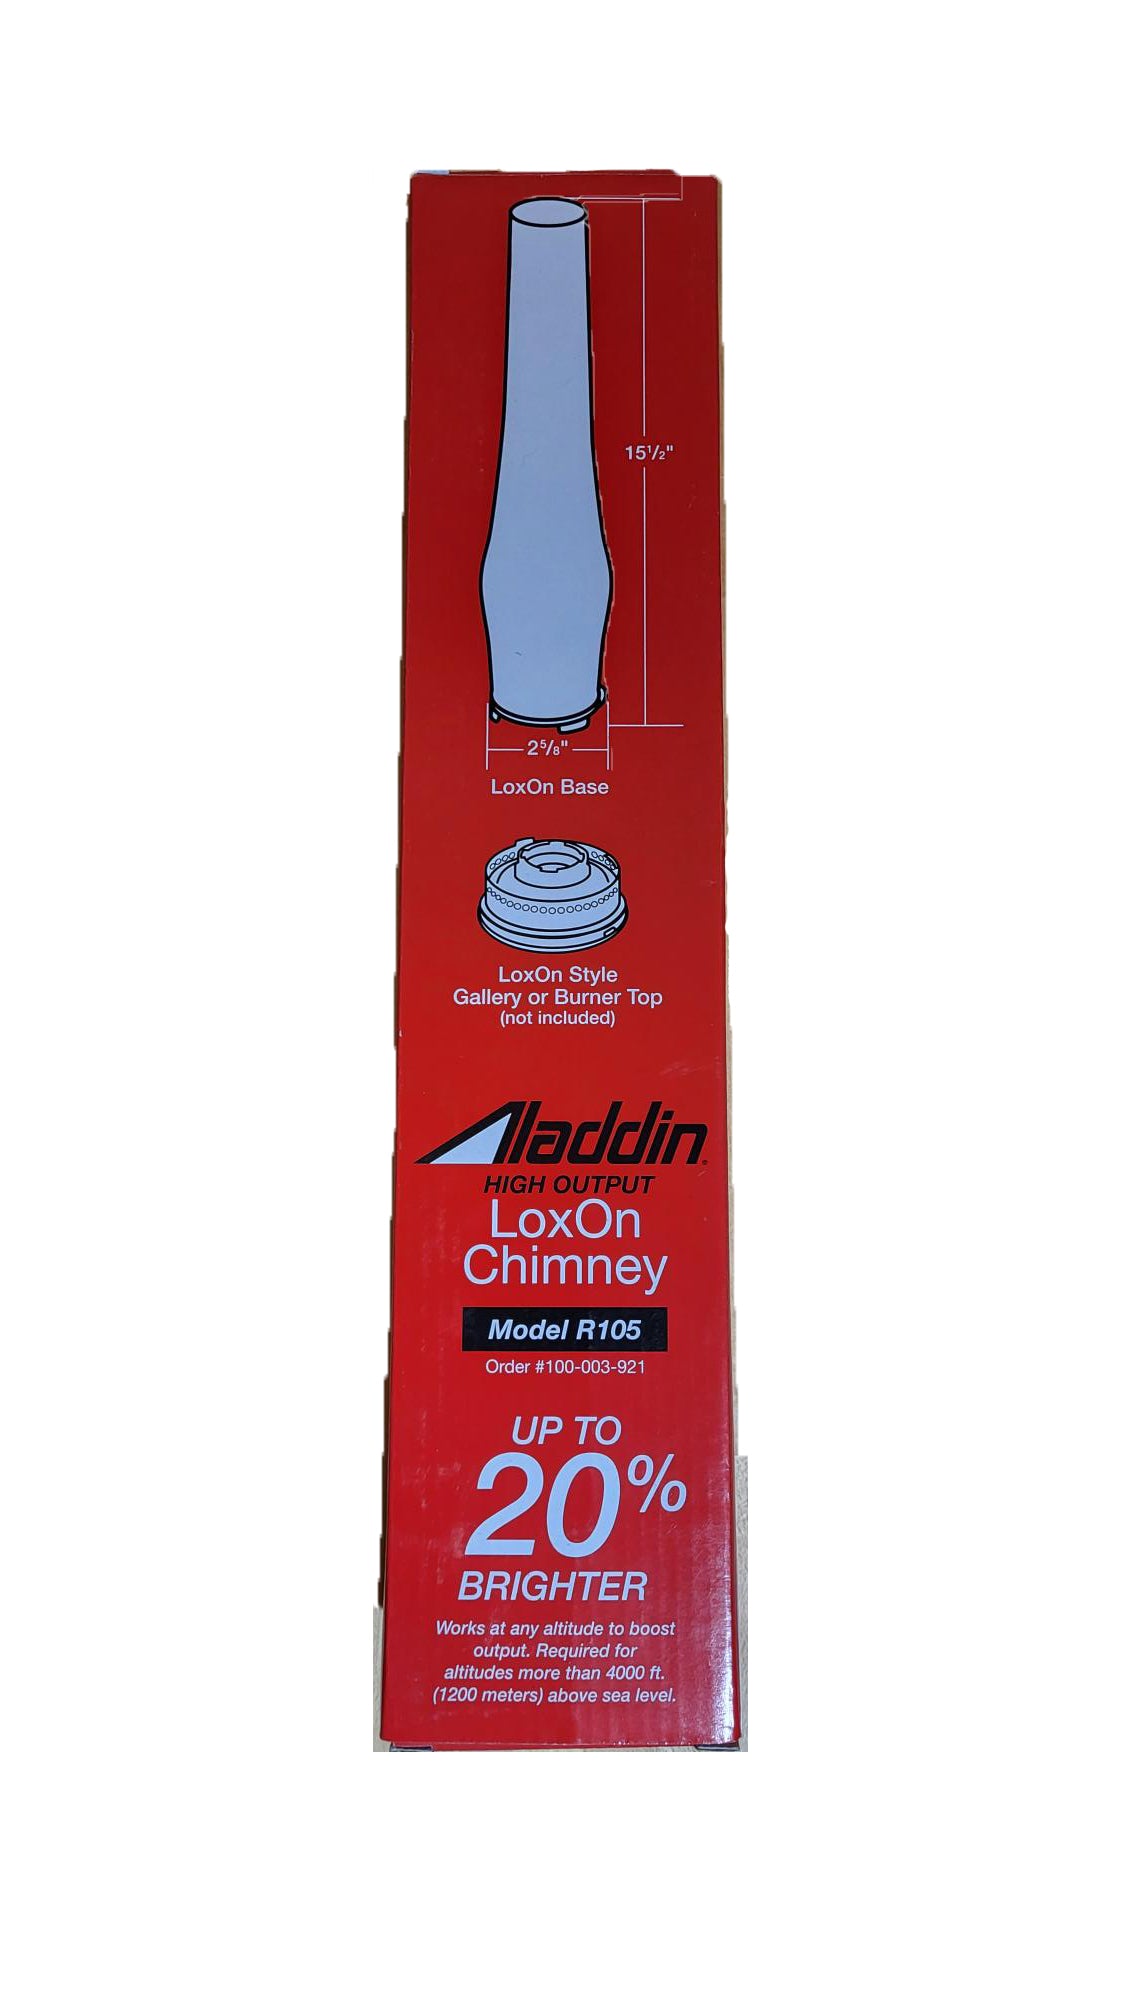 Aladdin Brand Lox-On High Output Chimney, 2 5/8" Fitter, 15 1/2" Tall (57959)